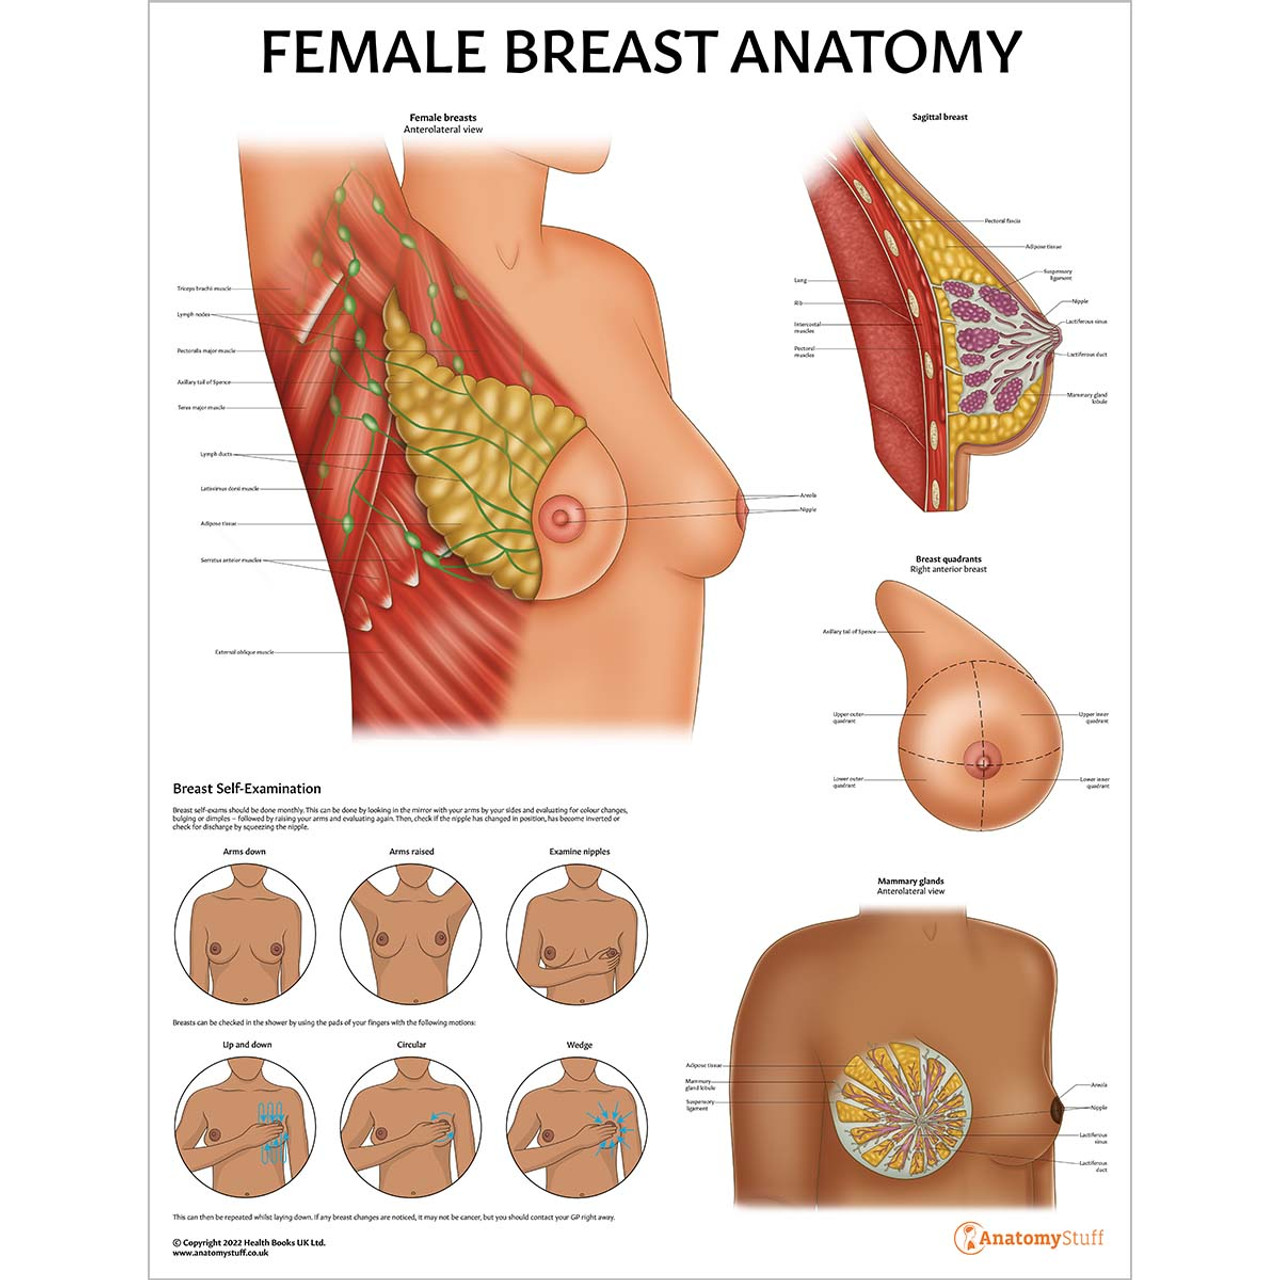 https://cdn11.bigcommerce.com/s-aw6hetyvsy/images/stencil/1280w/products/34003/39457/female-breast-anatomy-poster-chart__25843.1657099027.jpg